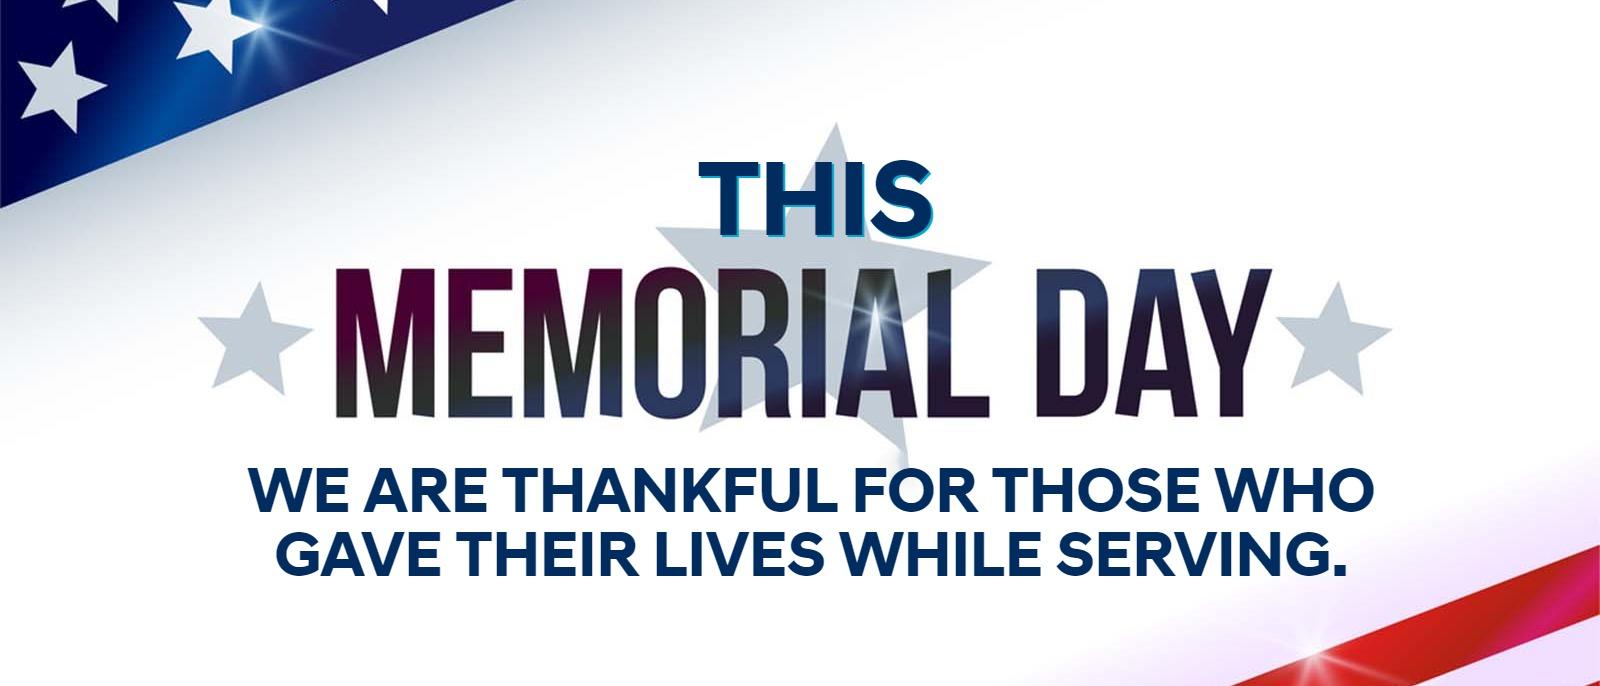 This Memorial Day, we are thankful for those who gave their lives while serving.